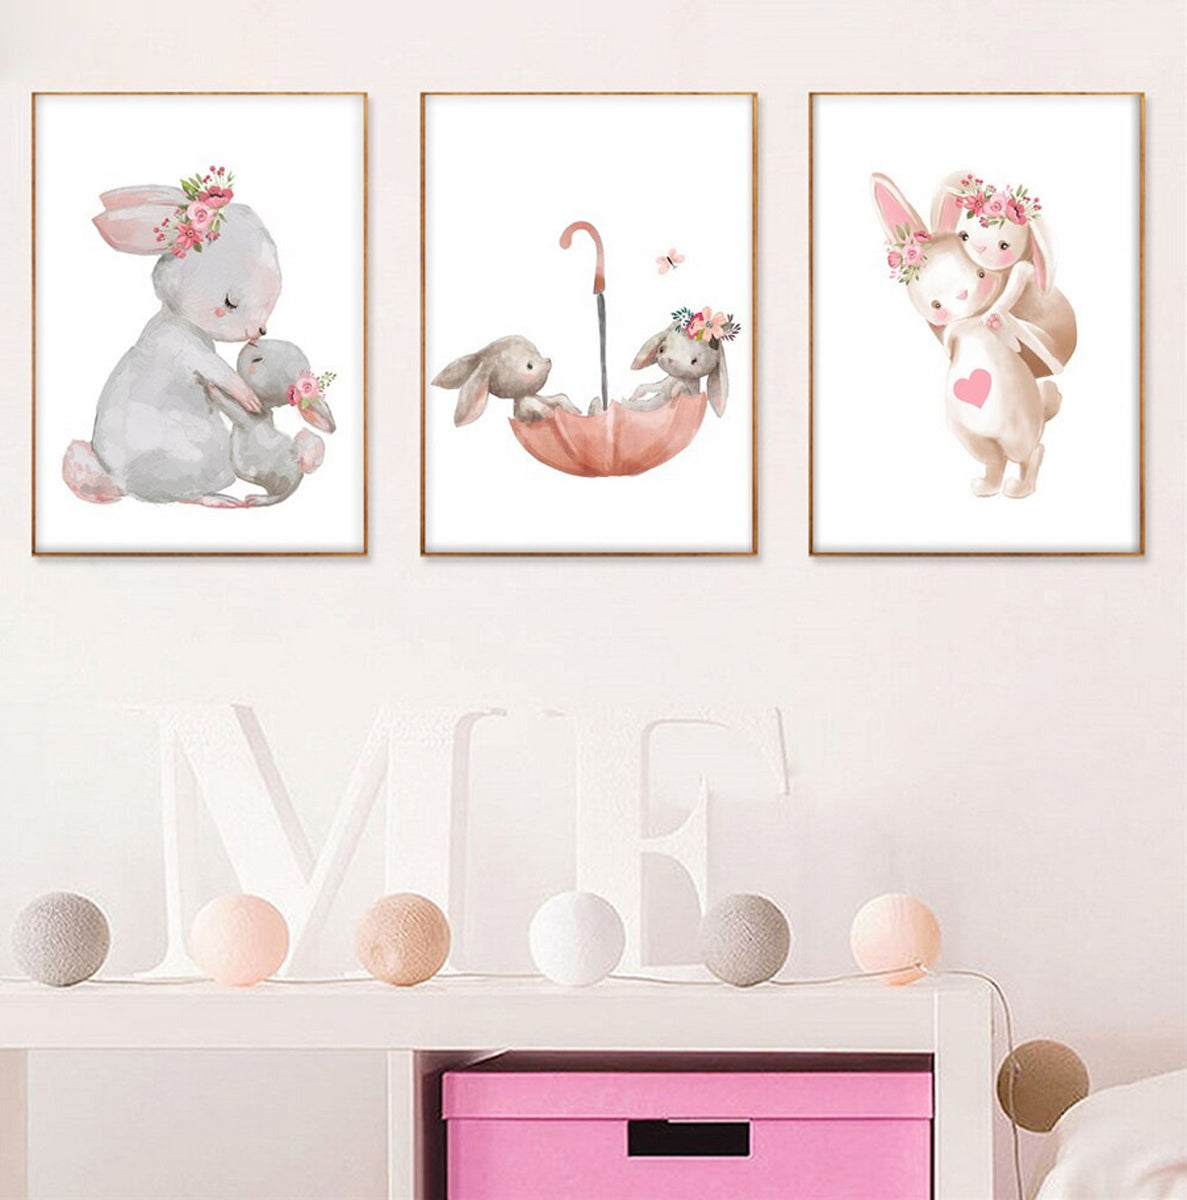 Canvas – Moon, Traumpreisfabrik on in TPFLiving Rabbit Rabbit / Poster Baby the with Umbr